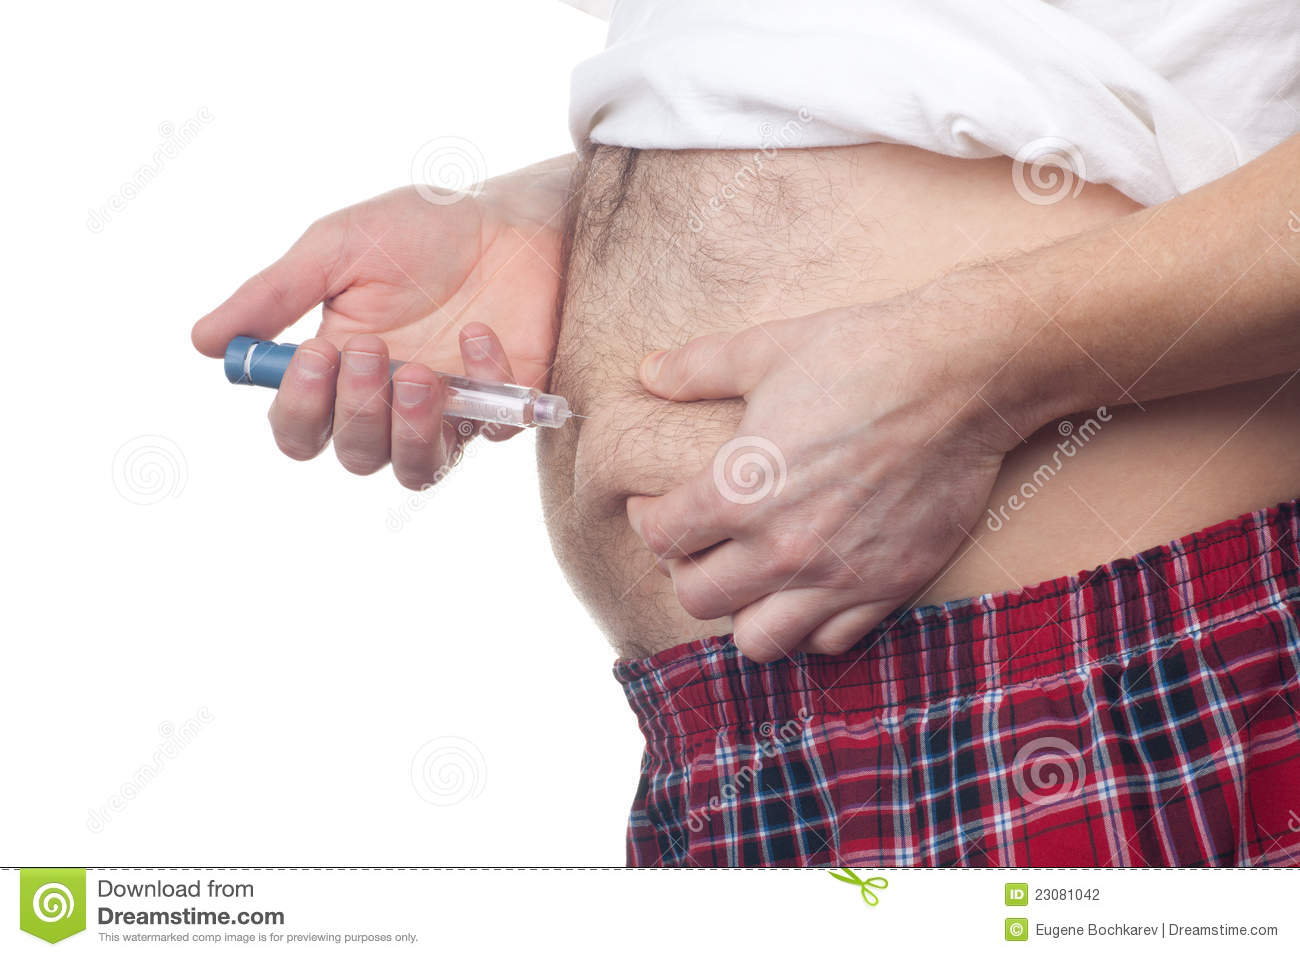 Overweight Fat Man With Diabetes Gets An Insulin Injection In Abdomen